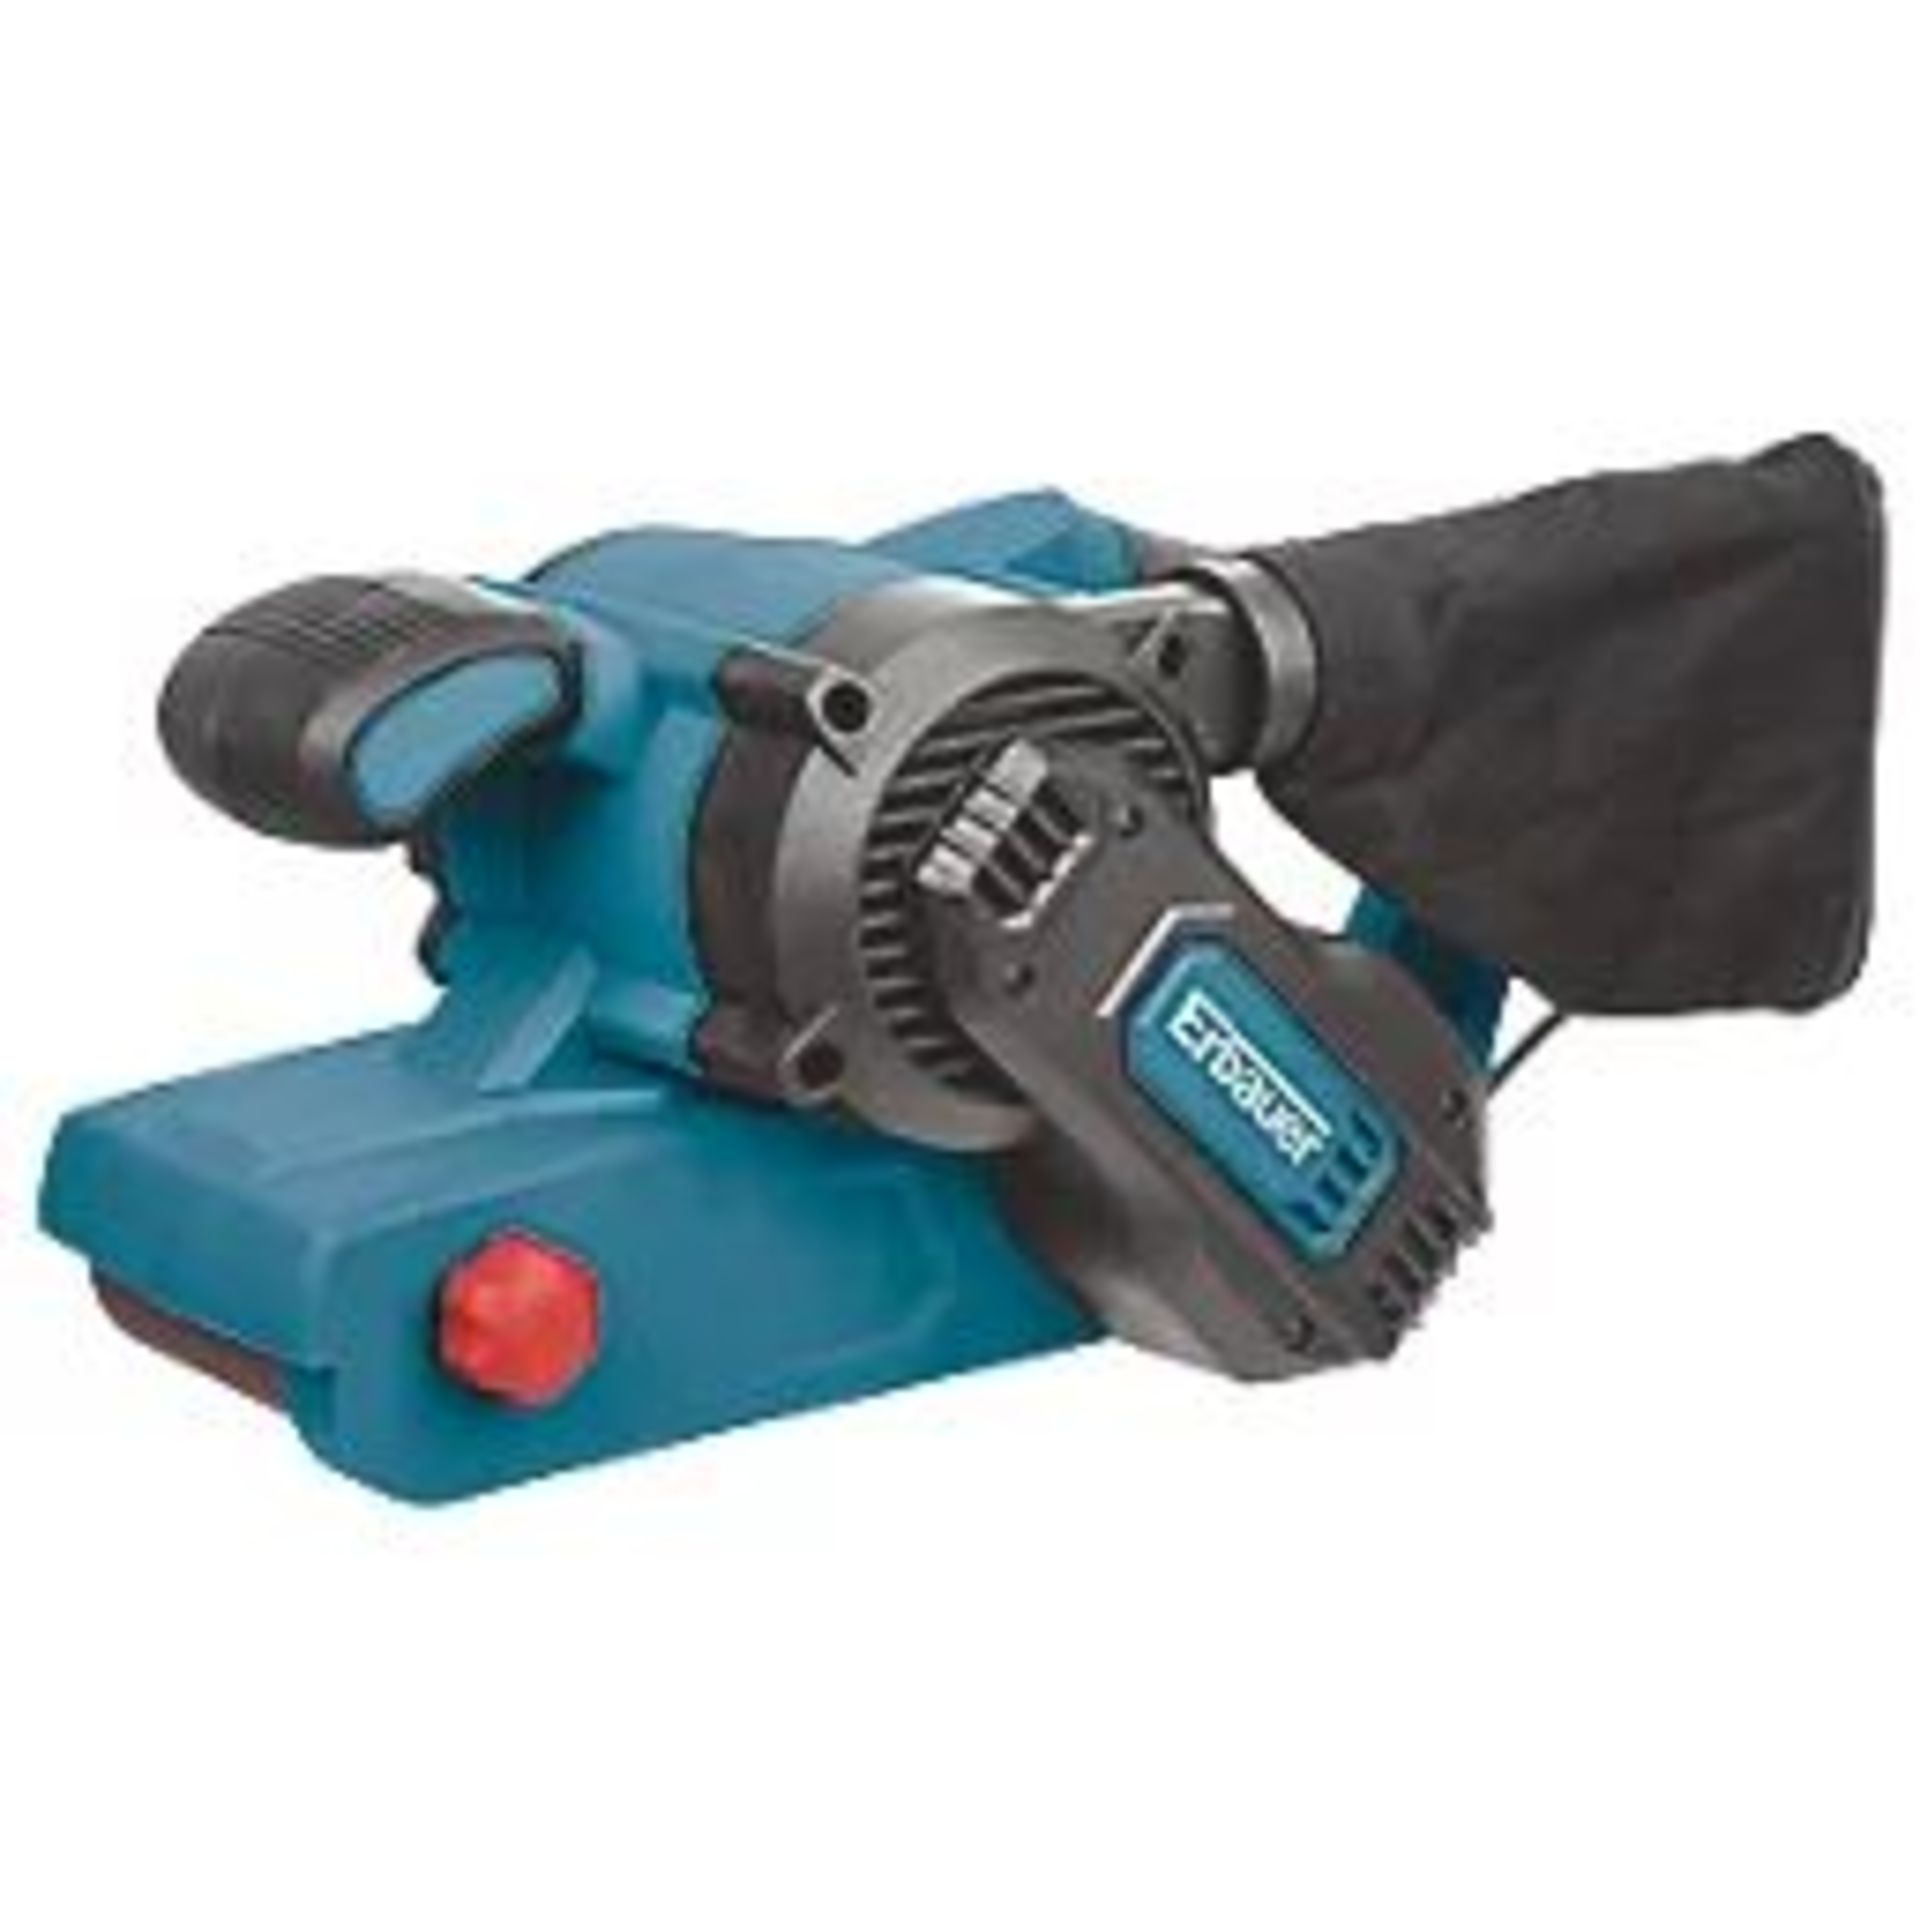 ERBAUER 3" ELECTRIC BELT SANDER 220-240V. - R14.16. Powerful and versatile with variable speed motor